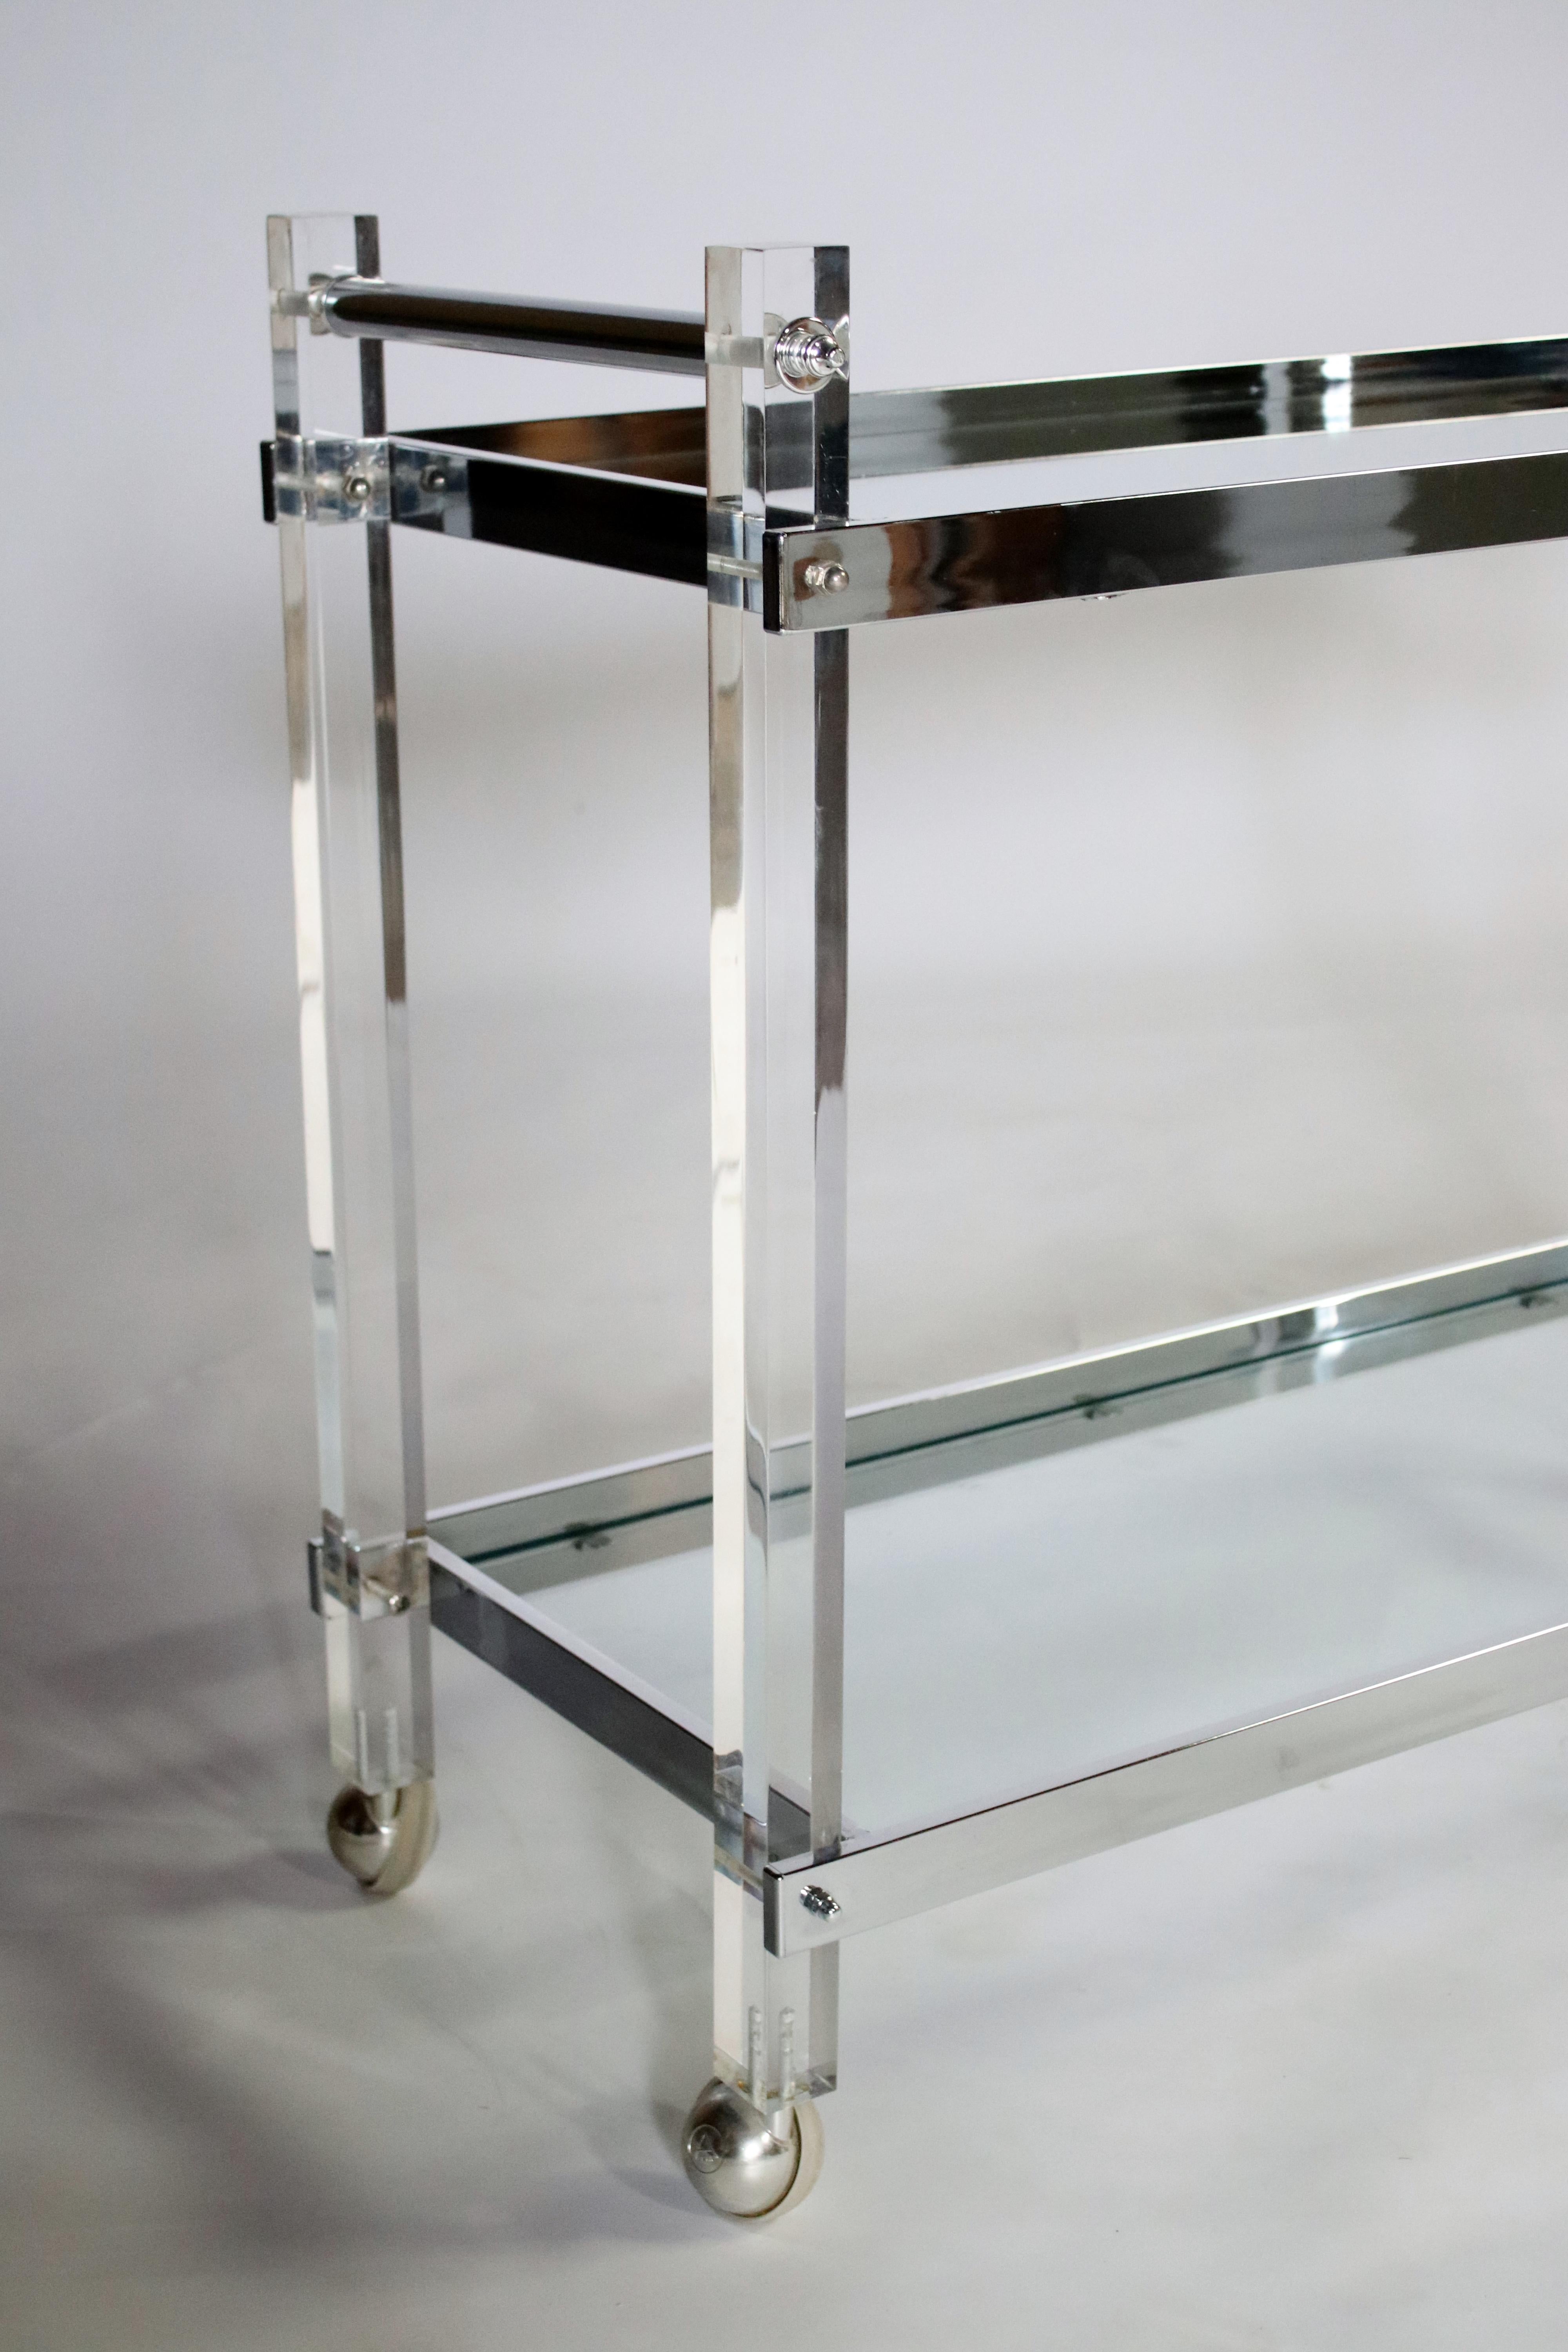 1970s chrome and glass and mirror rolling bar cart on castors.